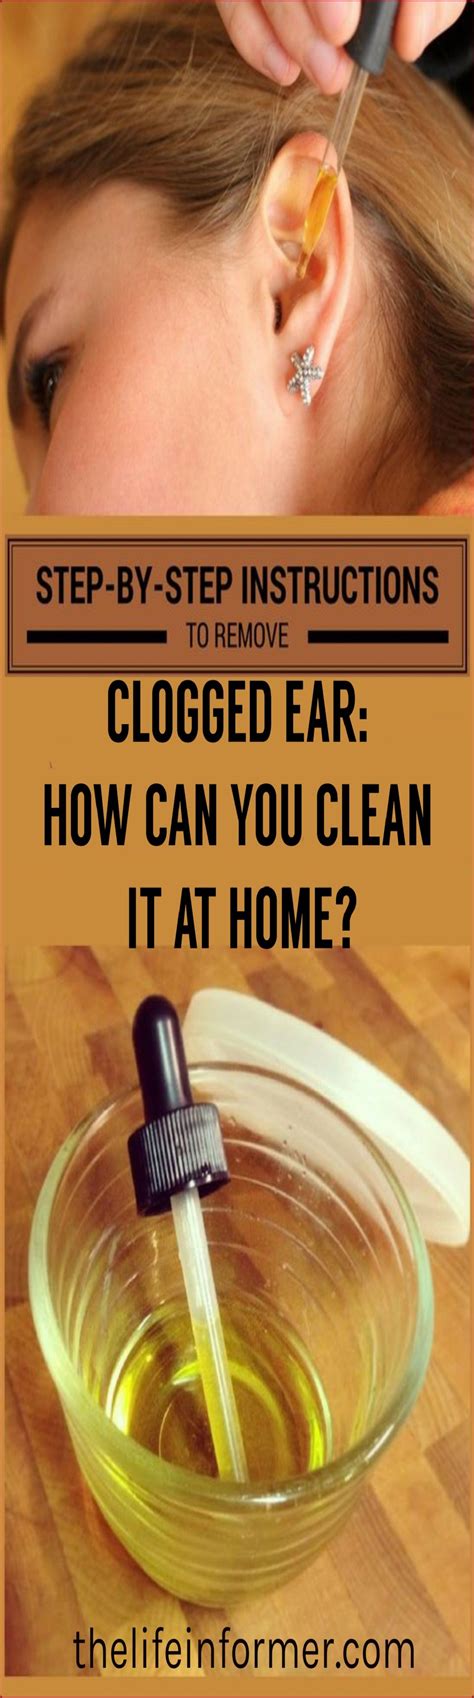 clogged ear    clean   home healthy fitness health